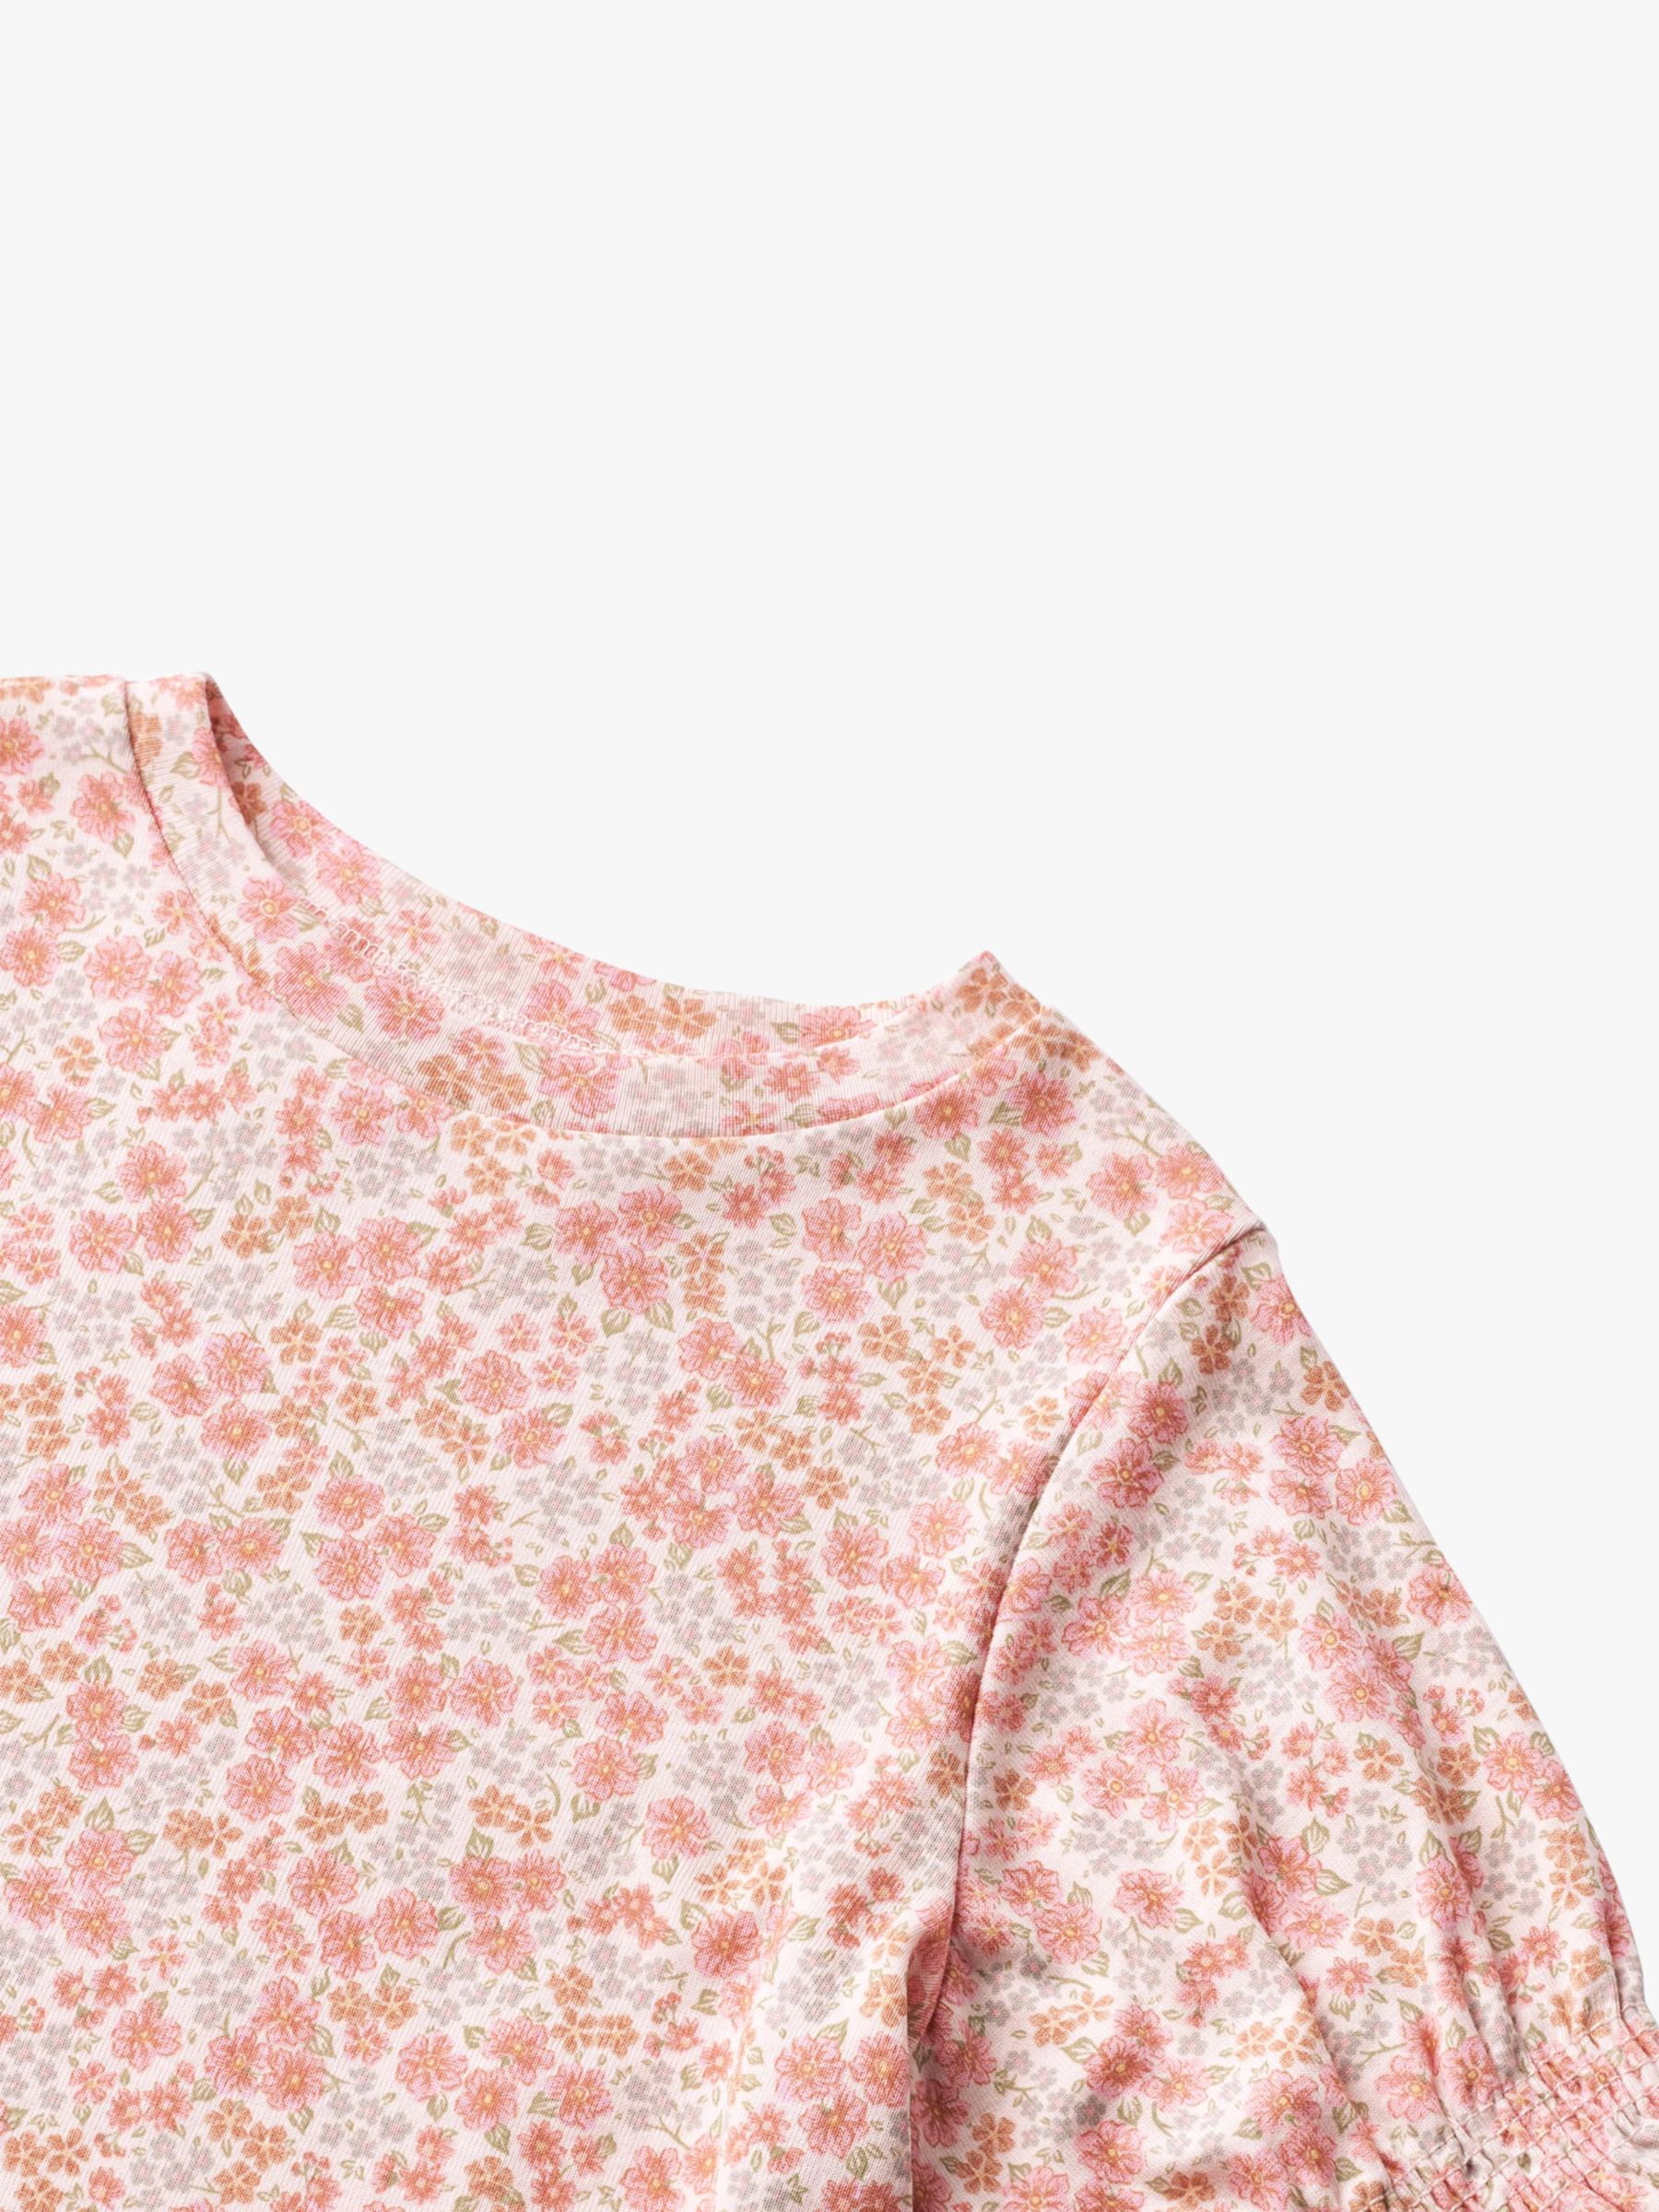 Buy WHEAT Kids' Norma Floral Print Top, Pink Online at johnlewis.com